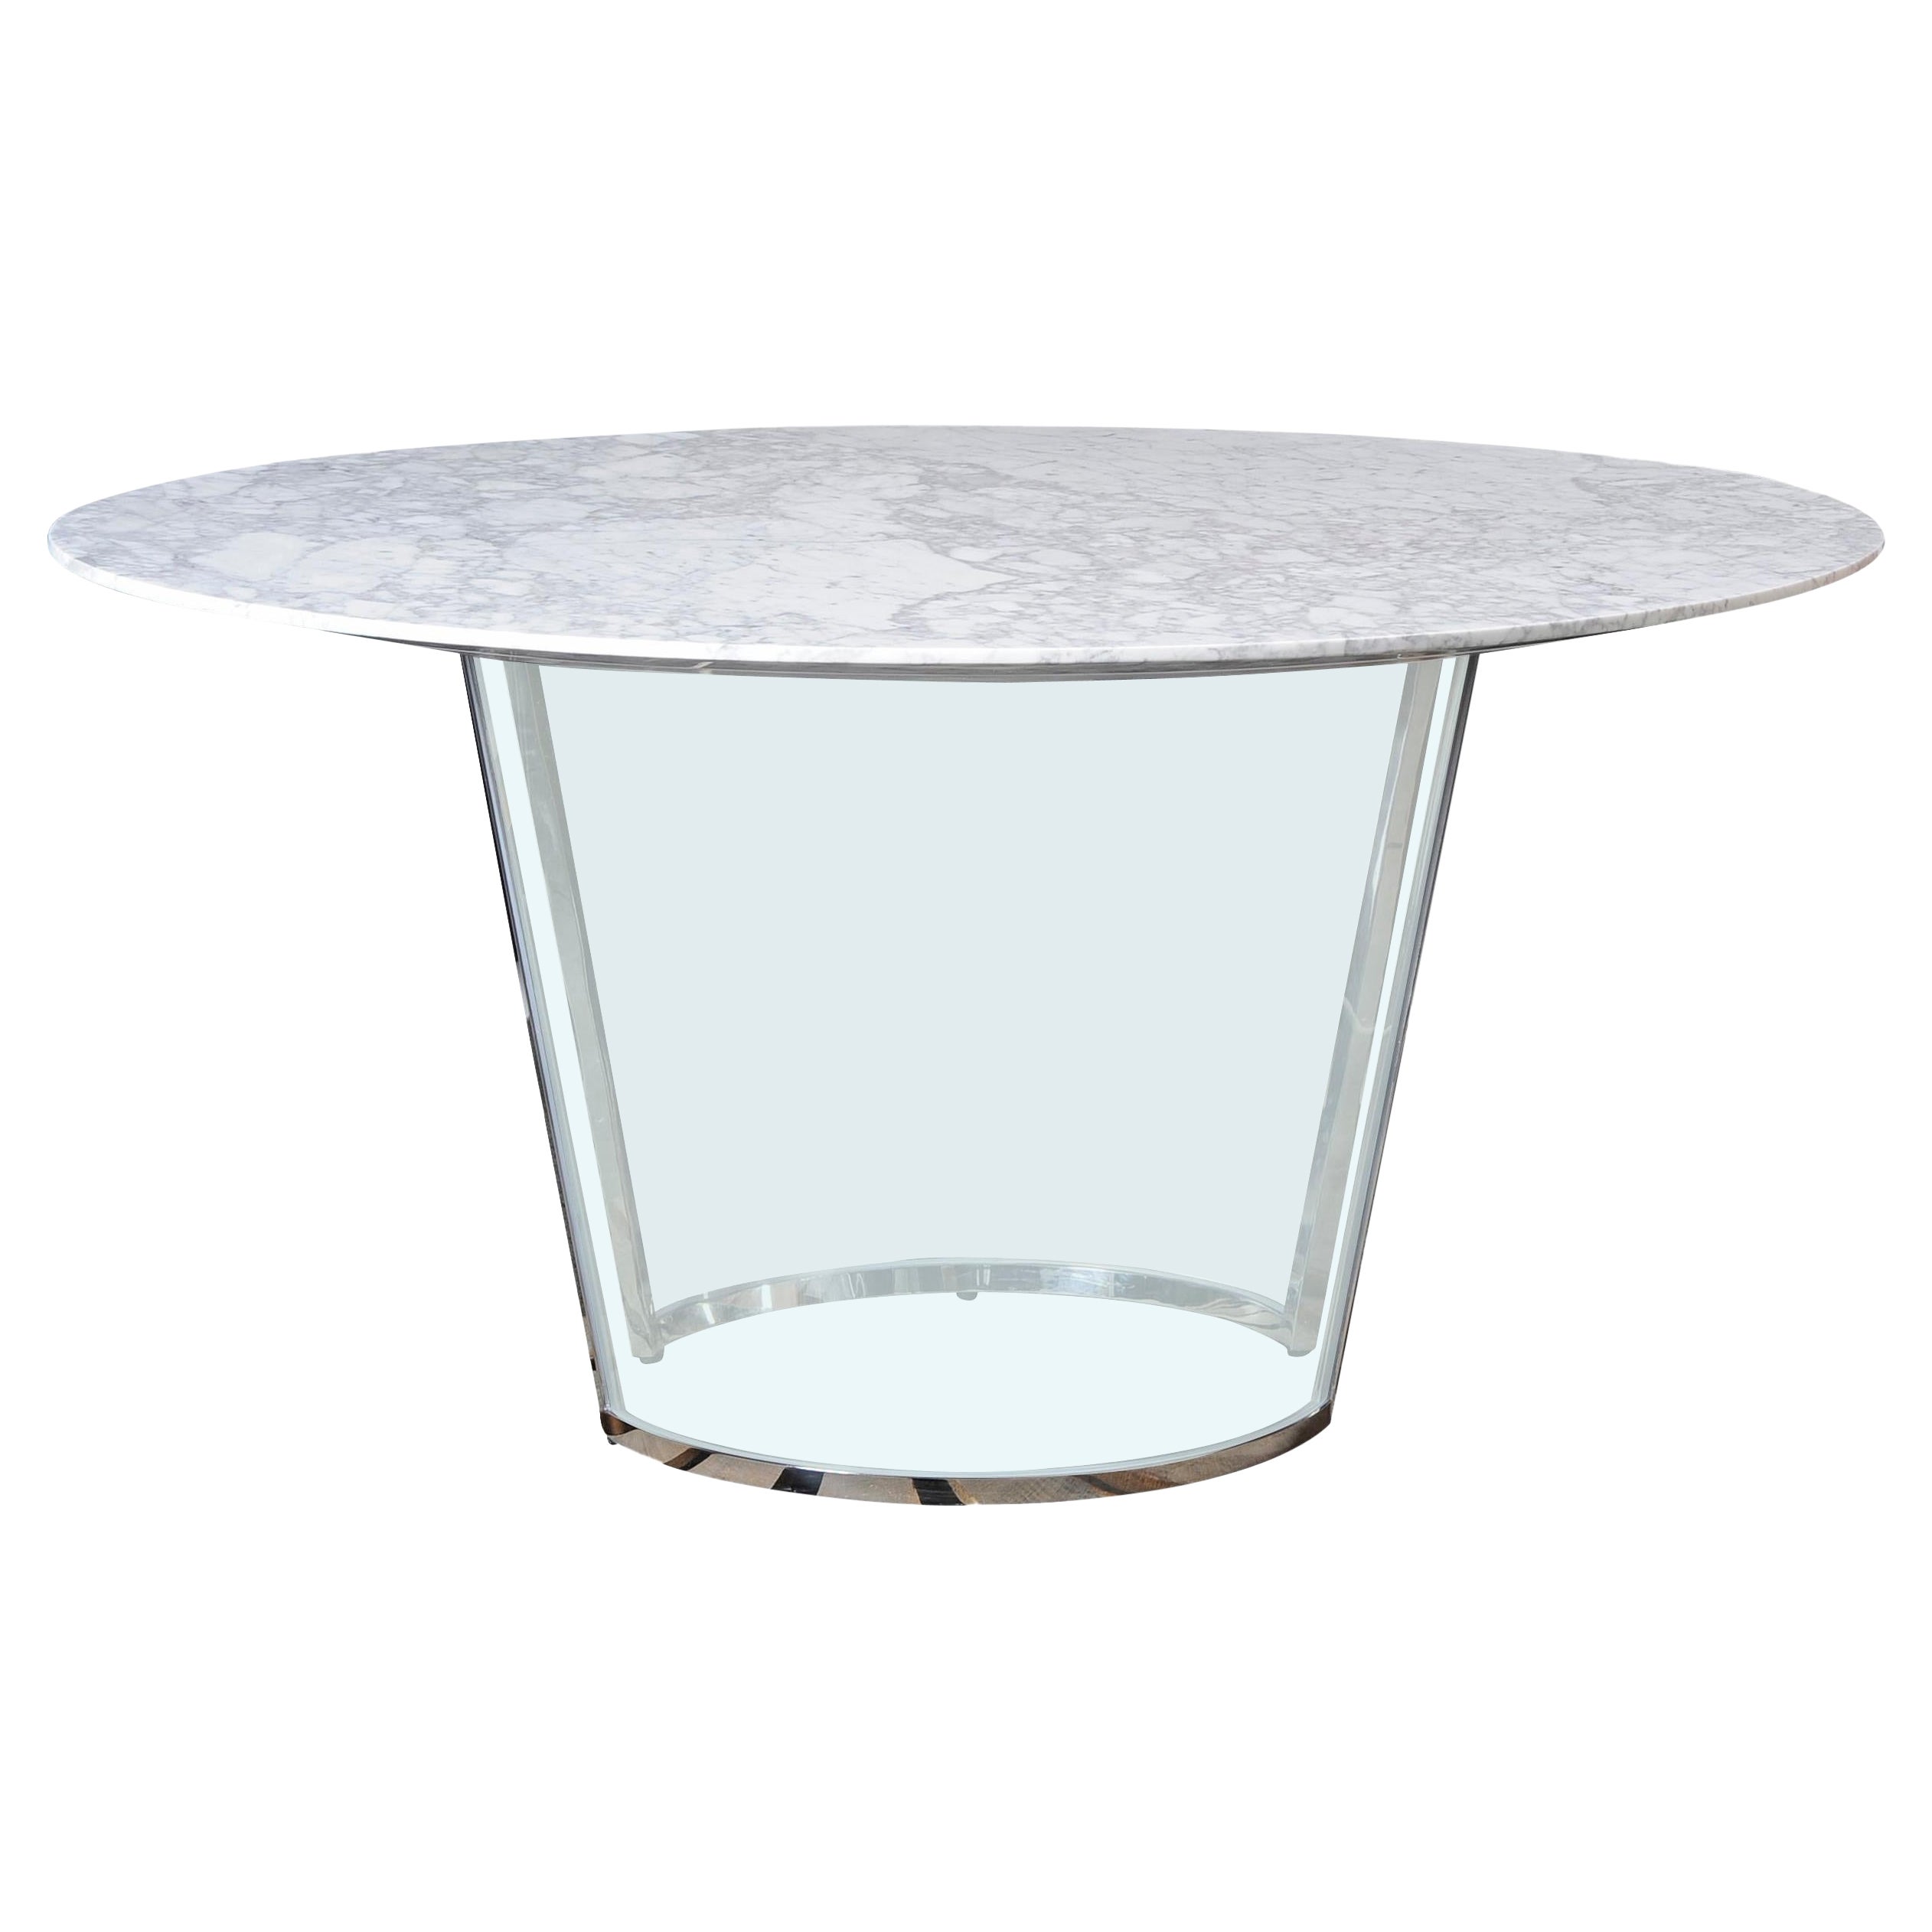 Float Dining Table, an Acrylic and Metal base with a Stone or Wood Top 72" Dia.